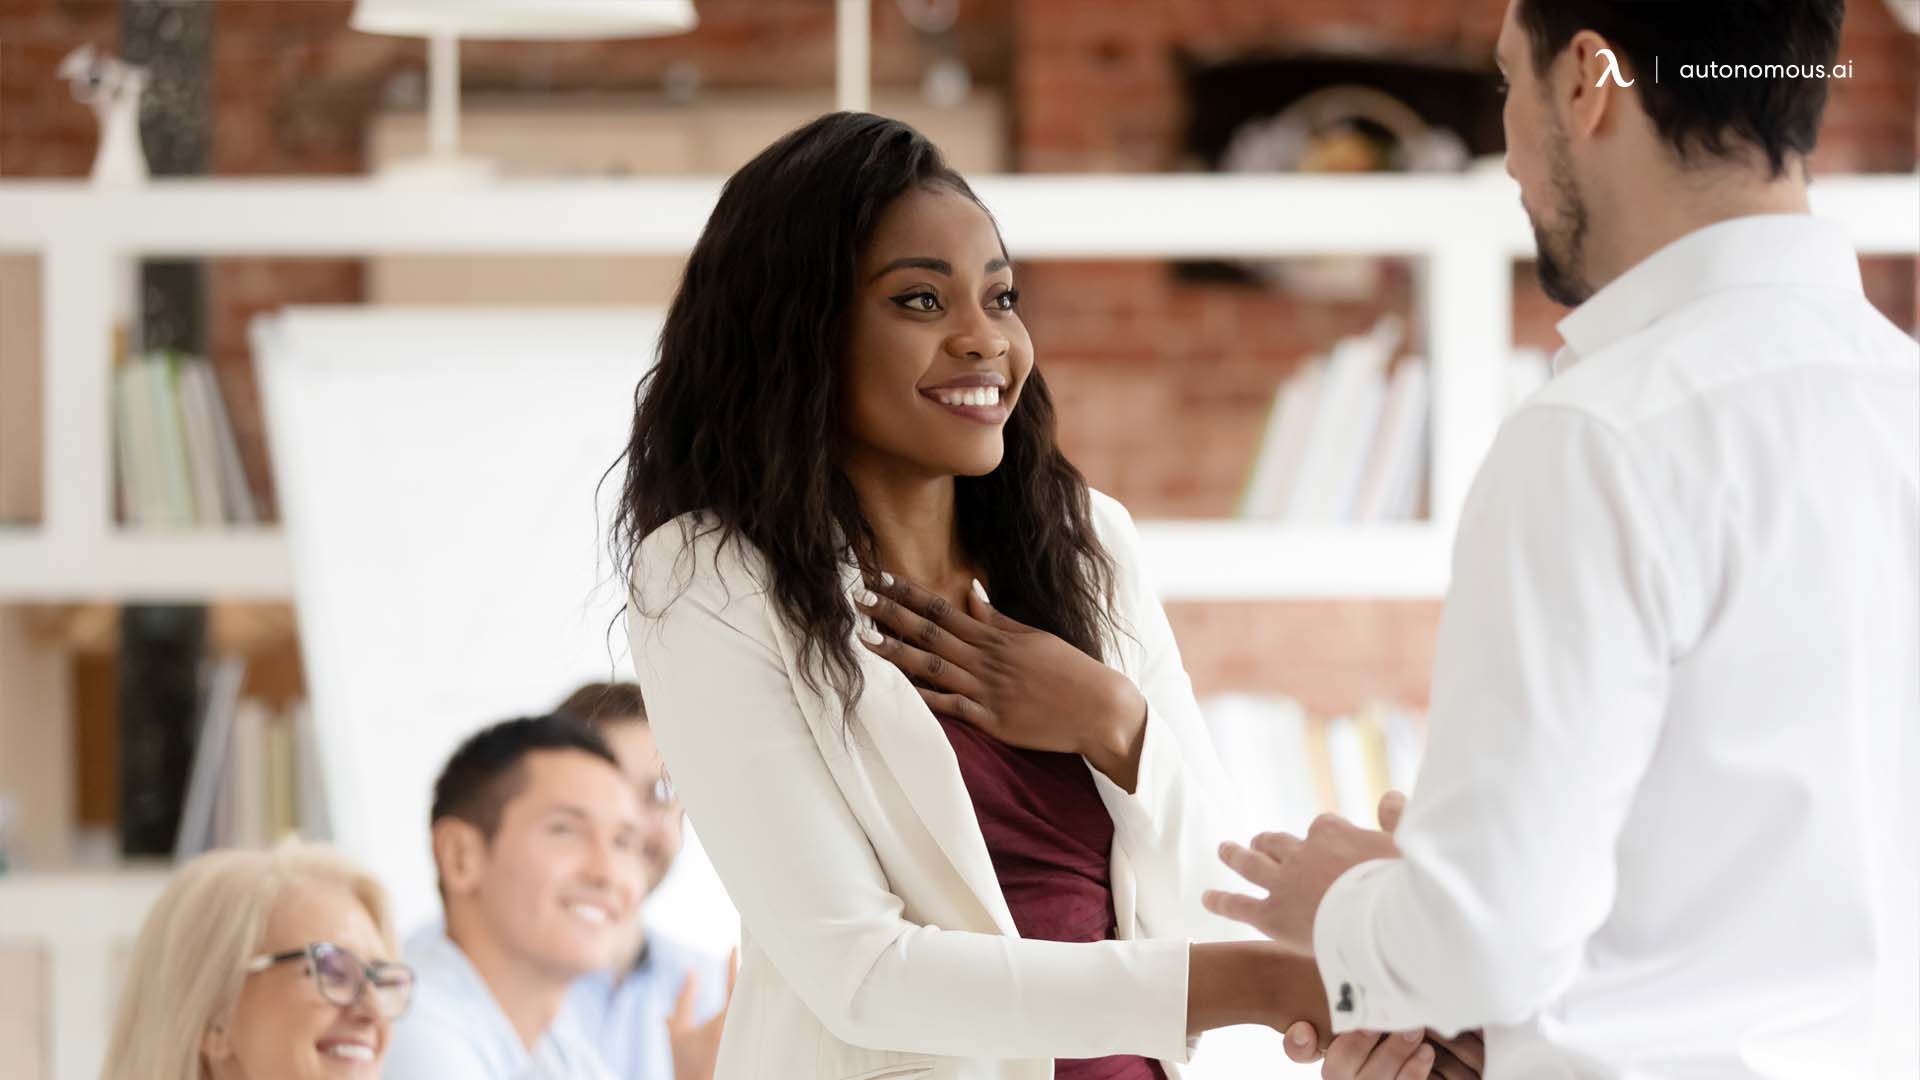 7 Ideas for Rewarding Employees in the Workplace